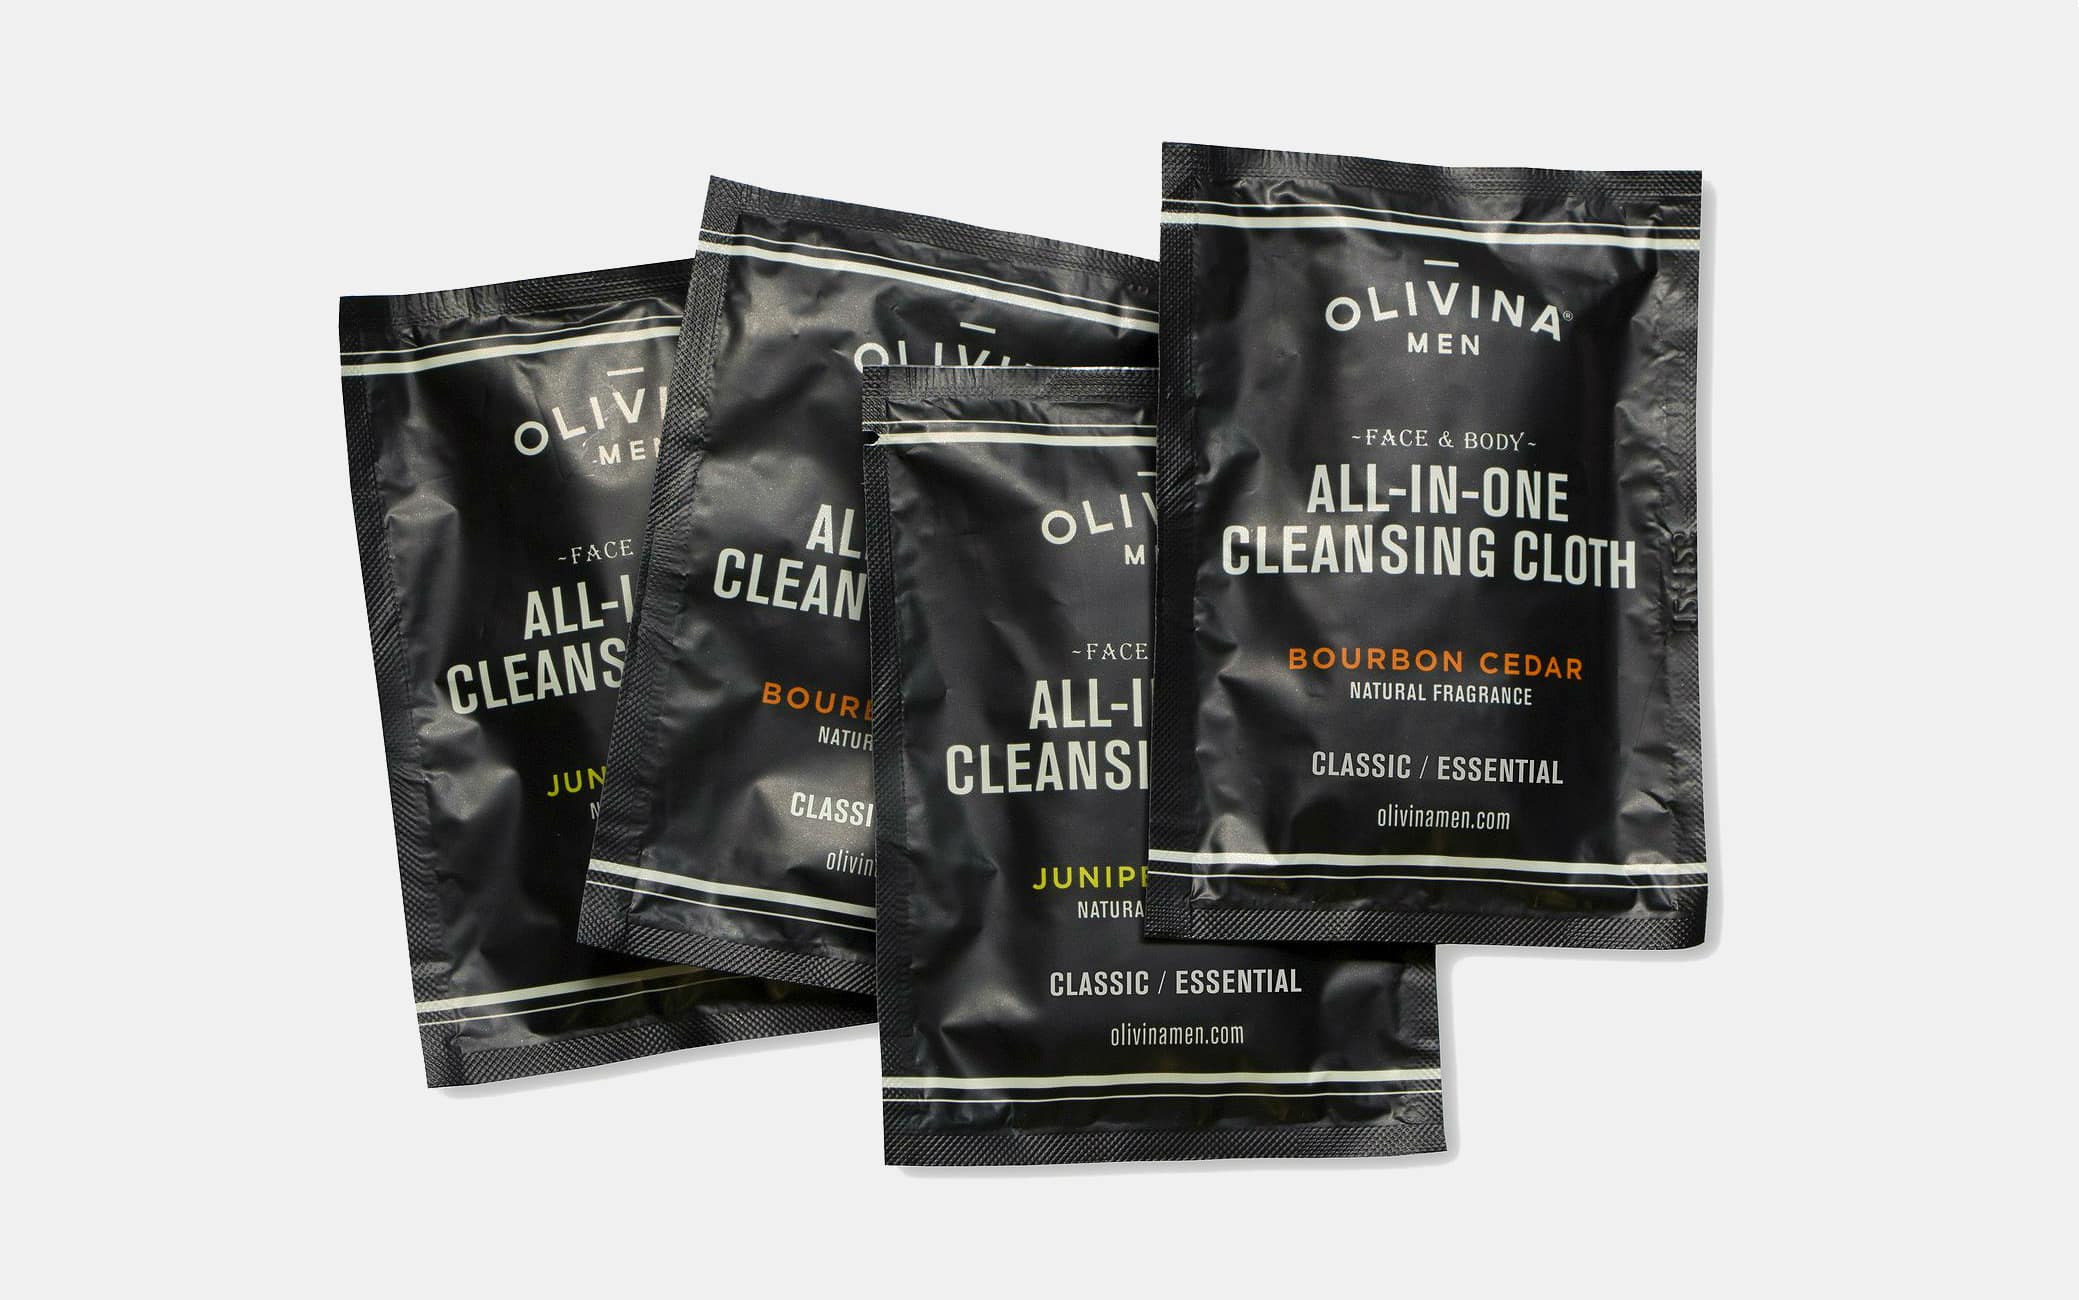 Olivina Men All-In-One Cleansing Cloths